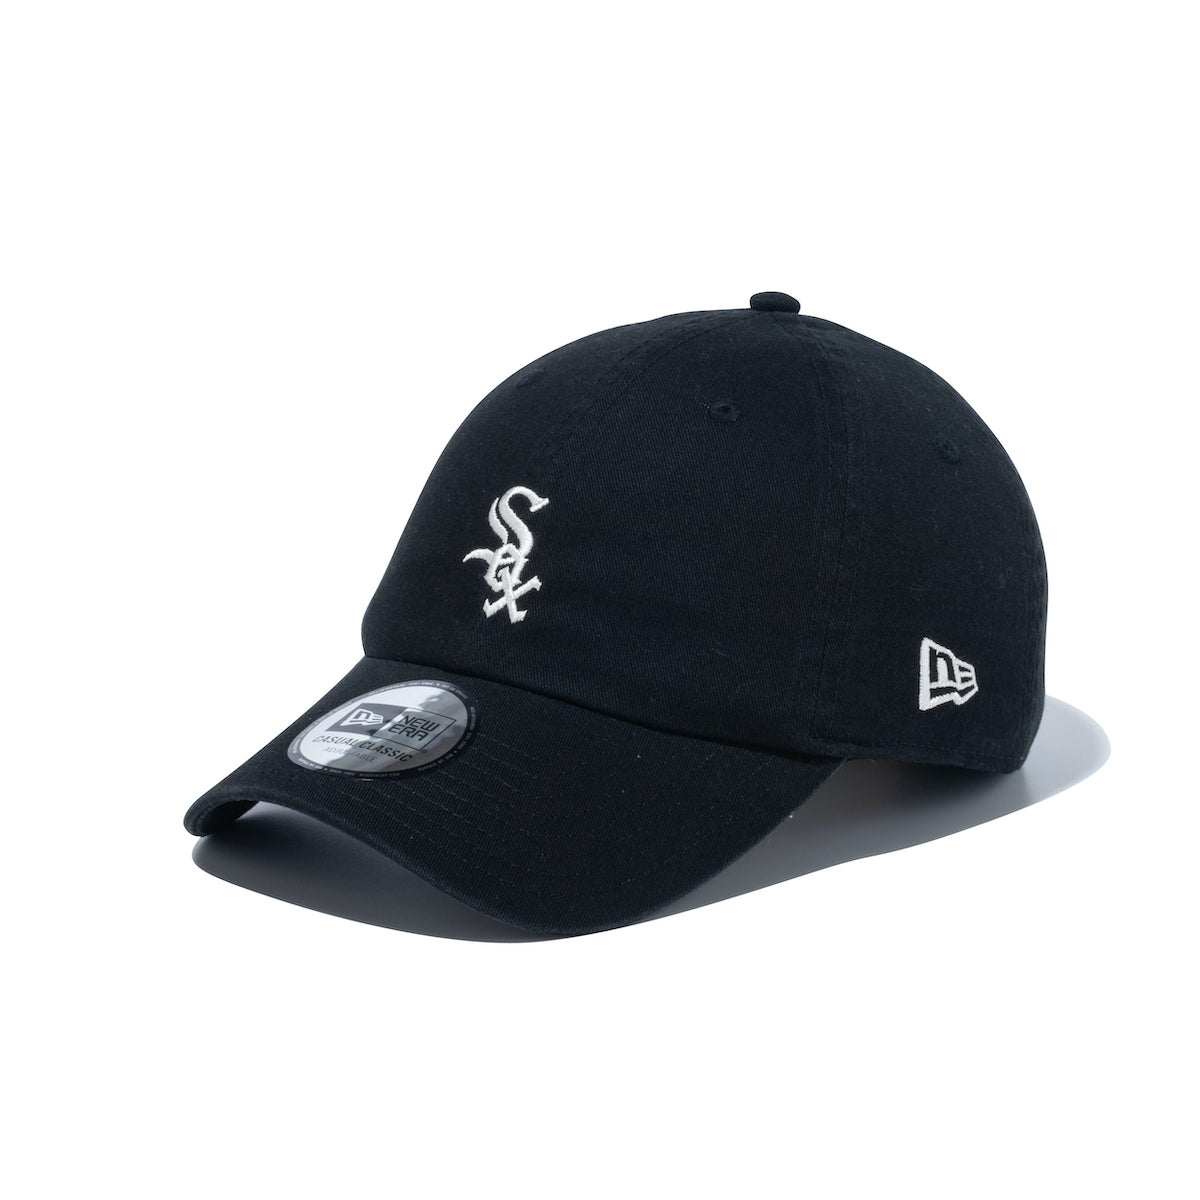 CHICAGO WHITE SOX MID LOGO CASUAL CLASSIC